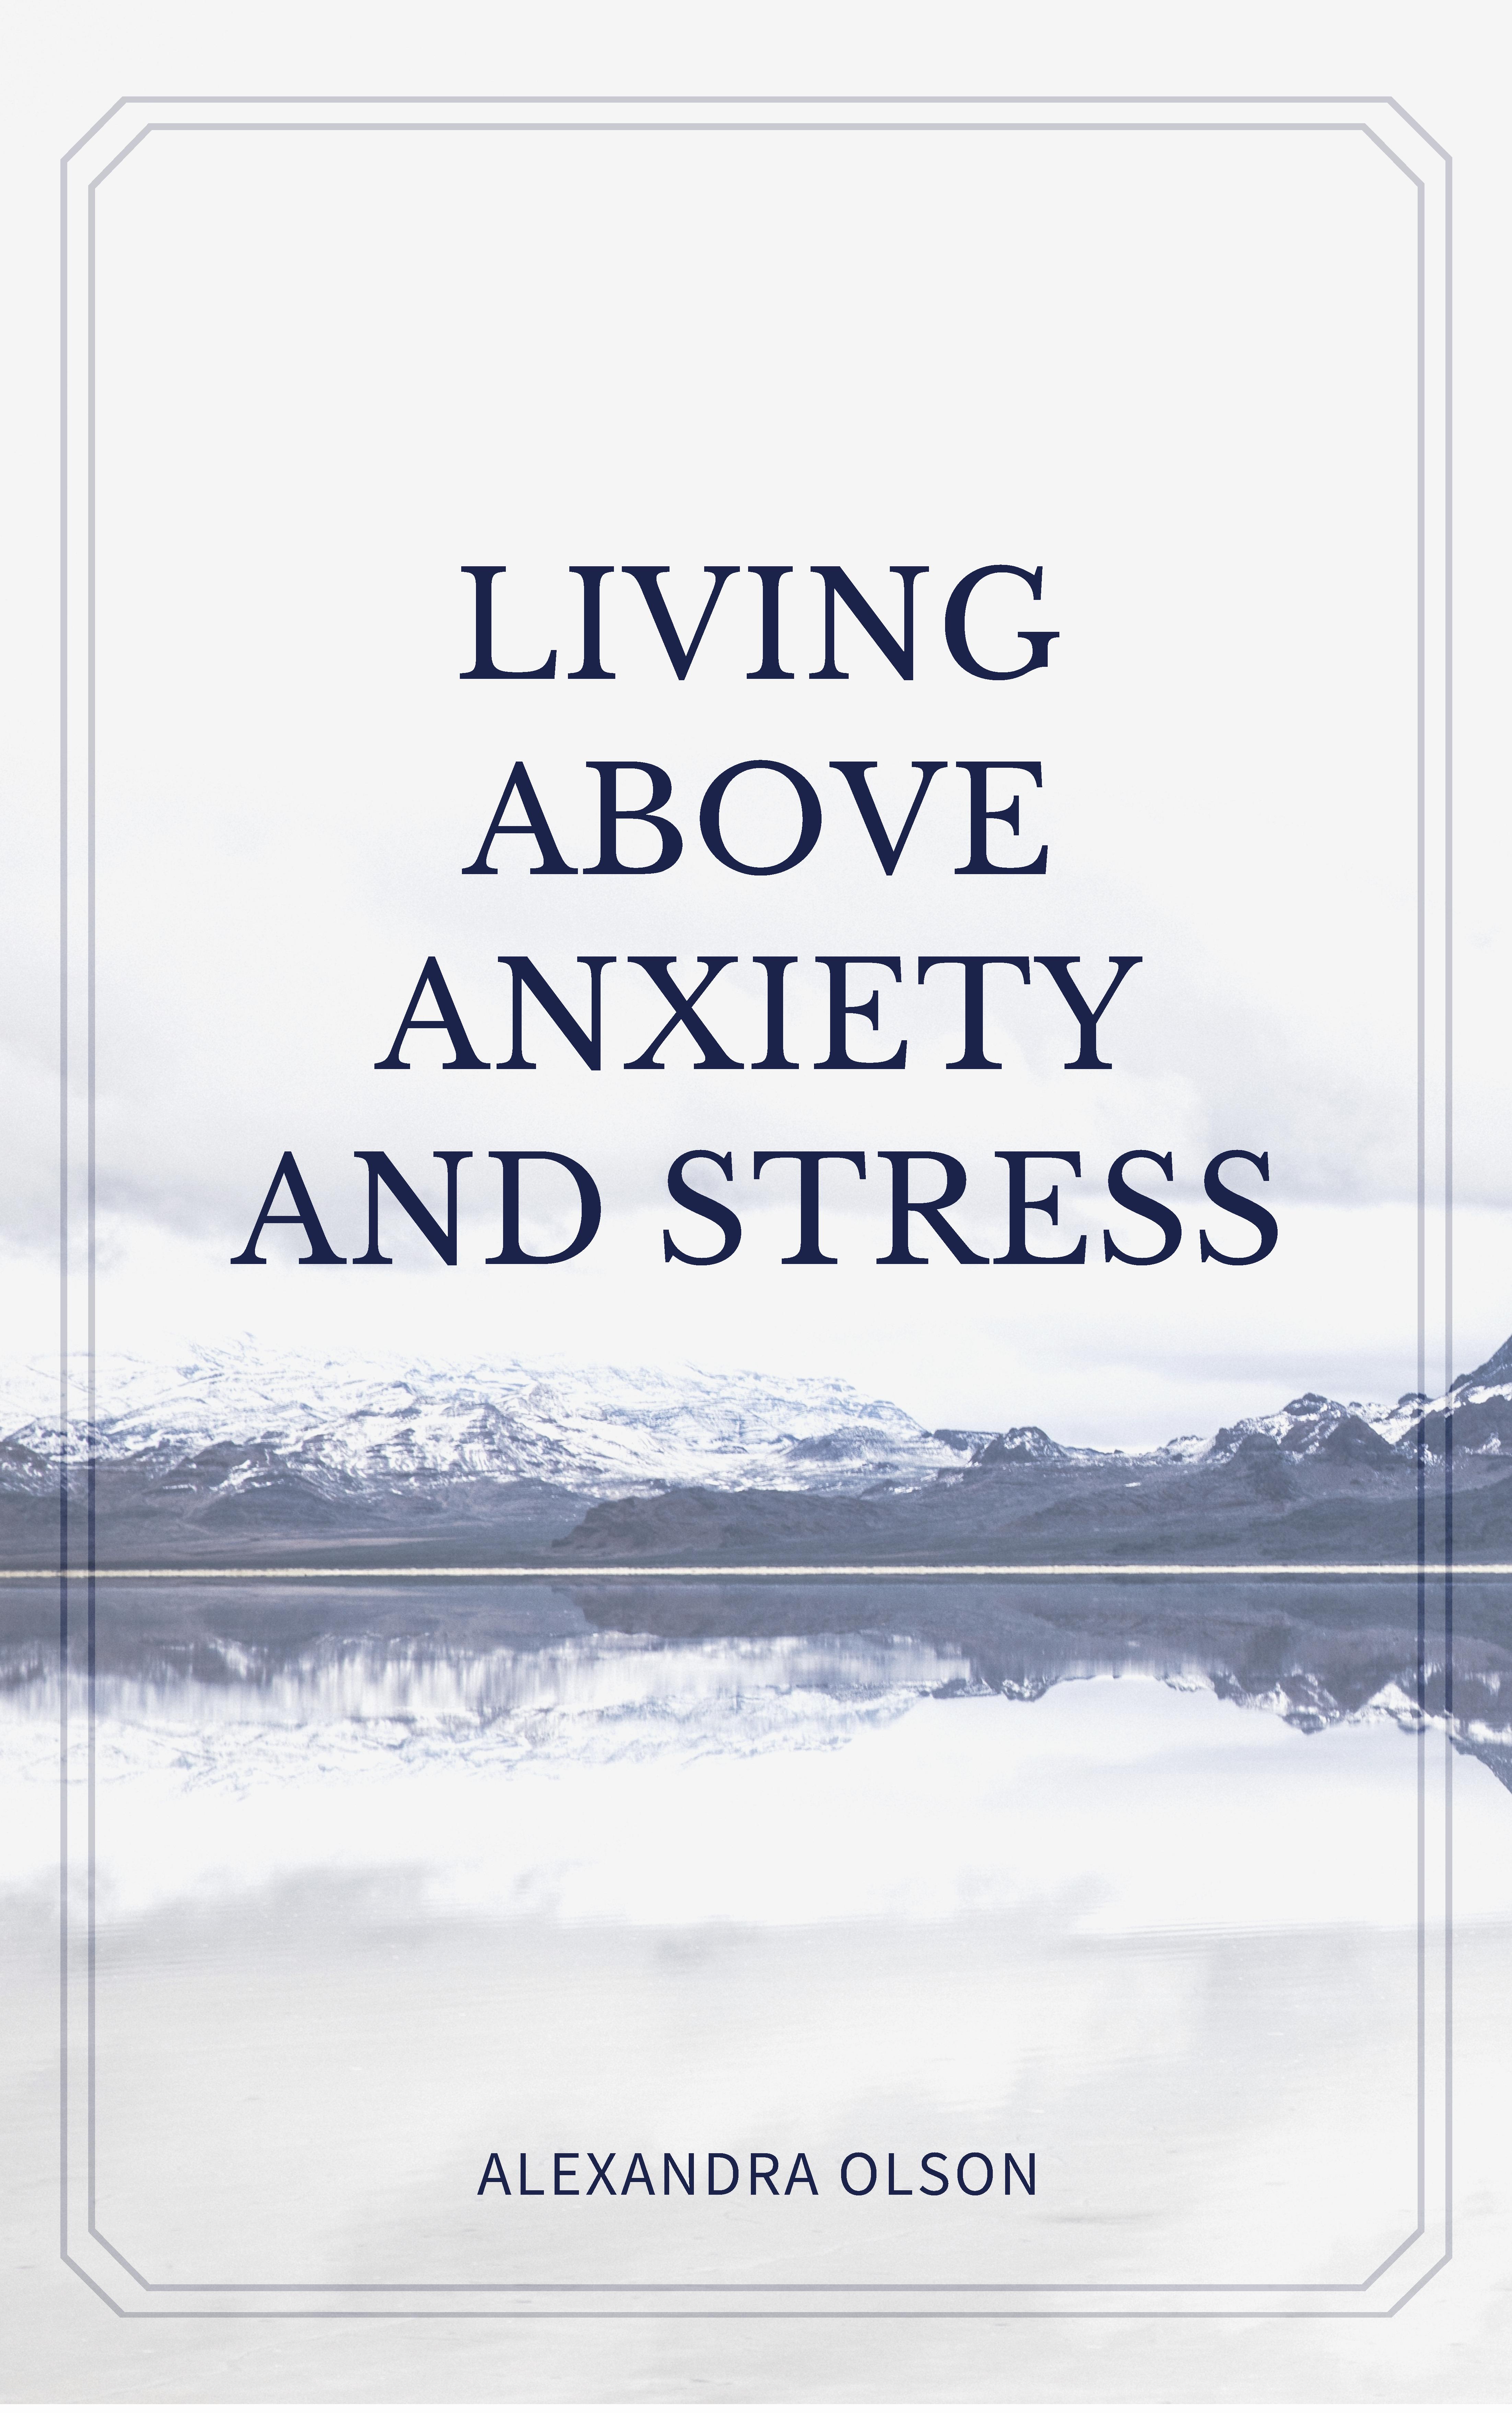 Living Above Stress And Anxiety